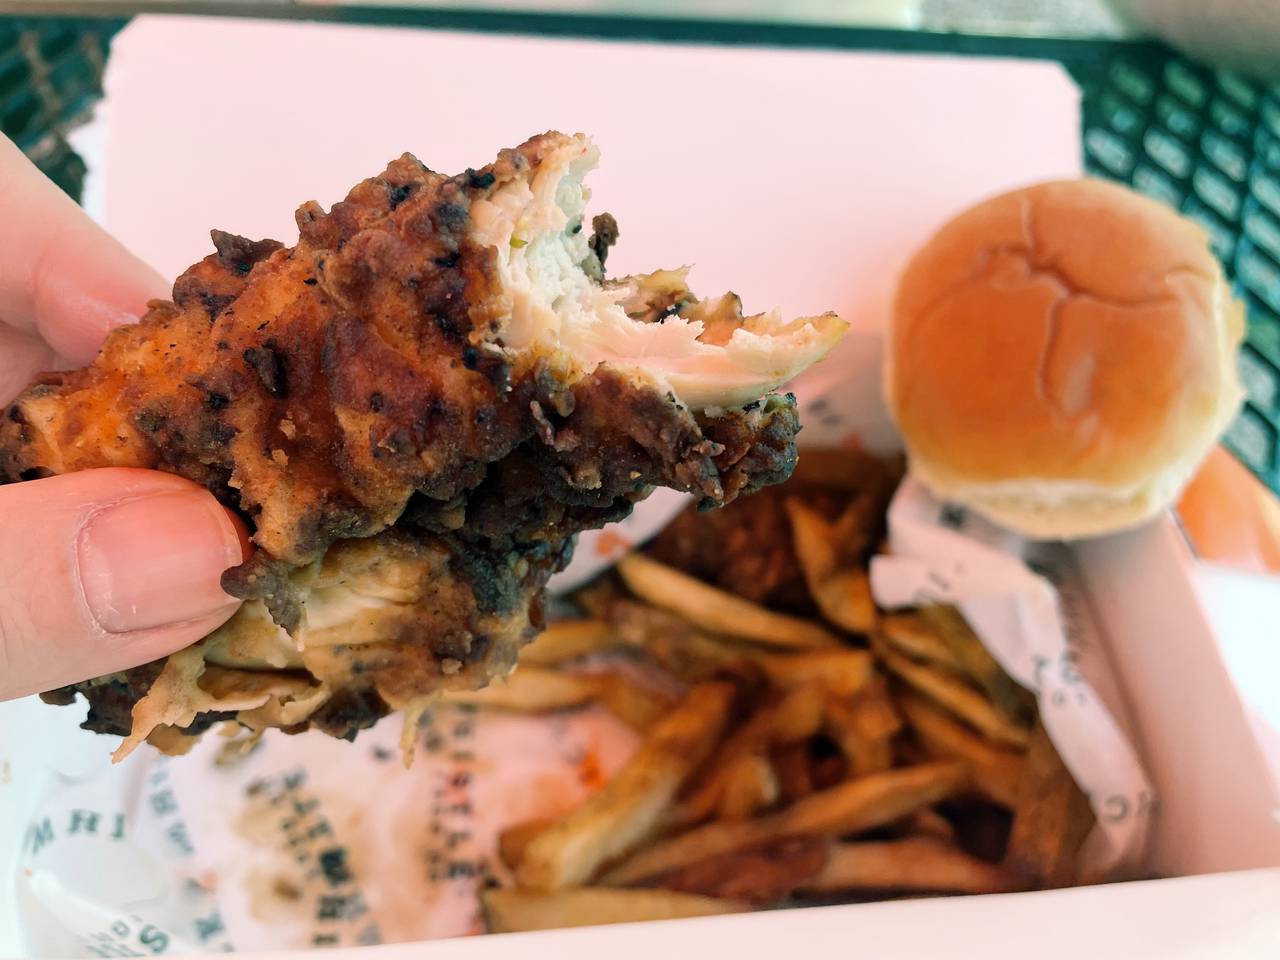 How did the Bmore chicken box at Camden Yards stack up against the version I tried during a media preview?